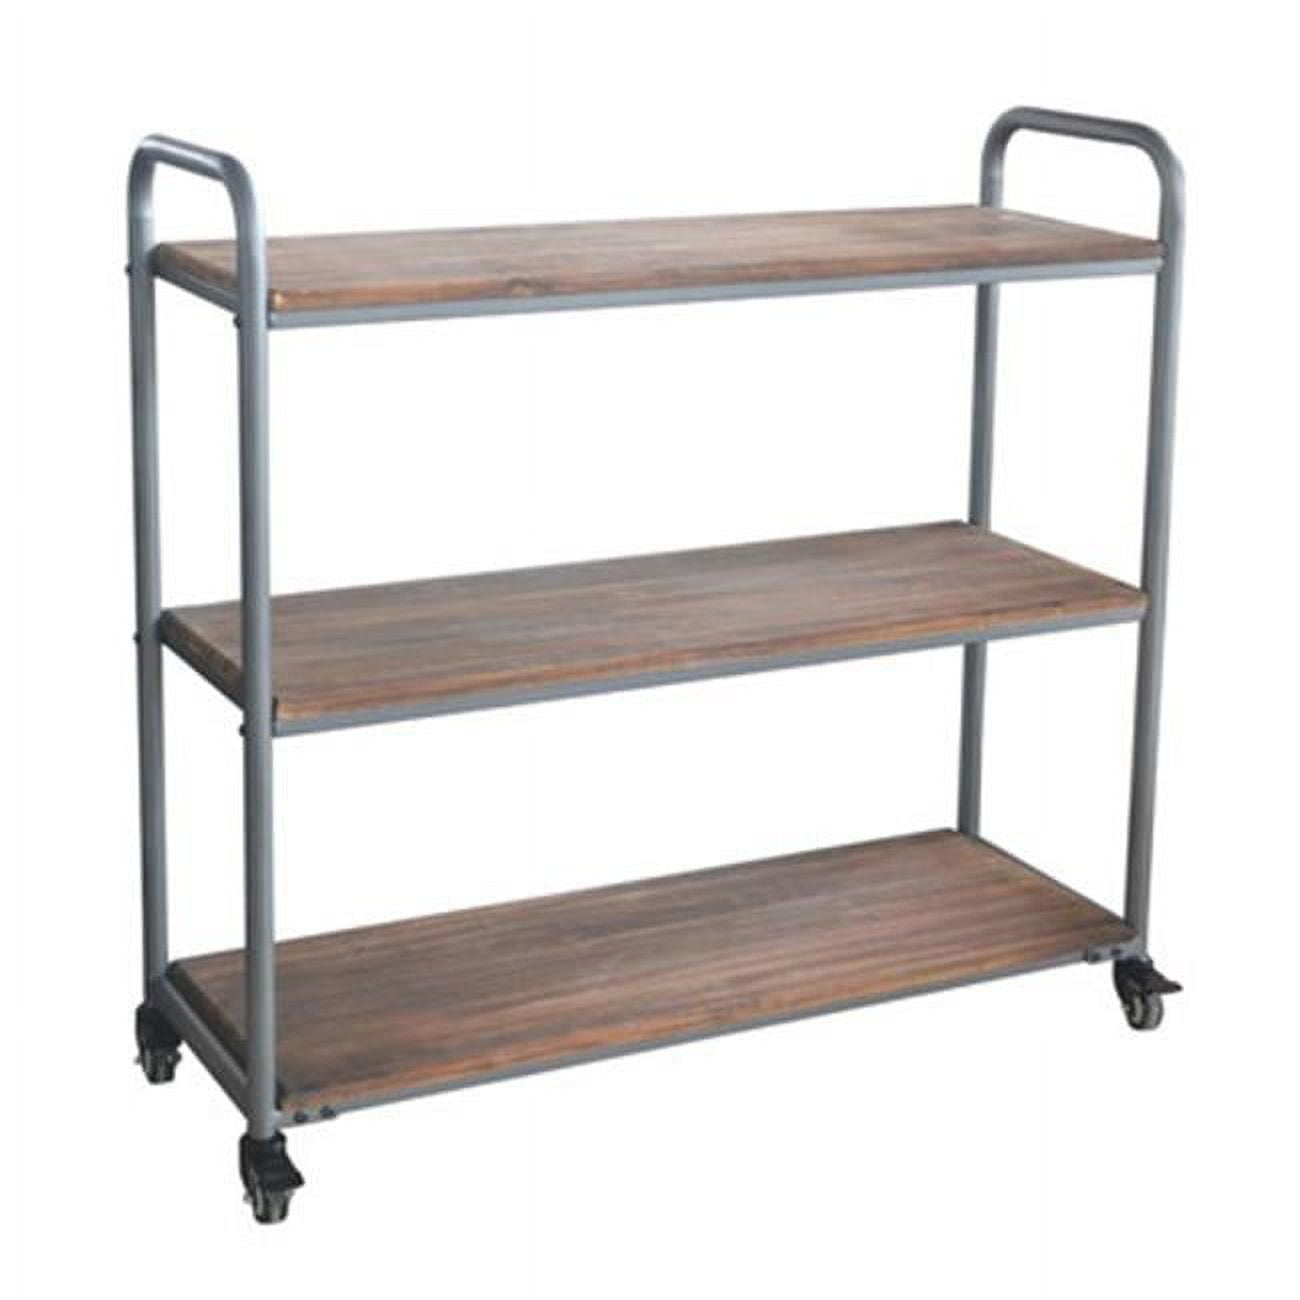 Picture of CheungsRattan FP-4255 4 Tier Shelf with Wheel Utility Cart - Gray